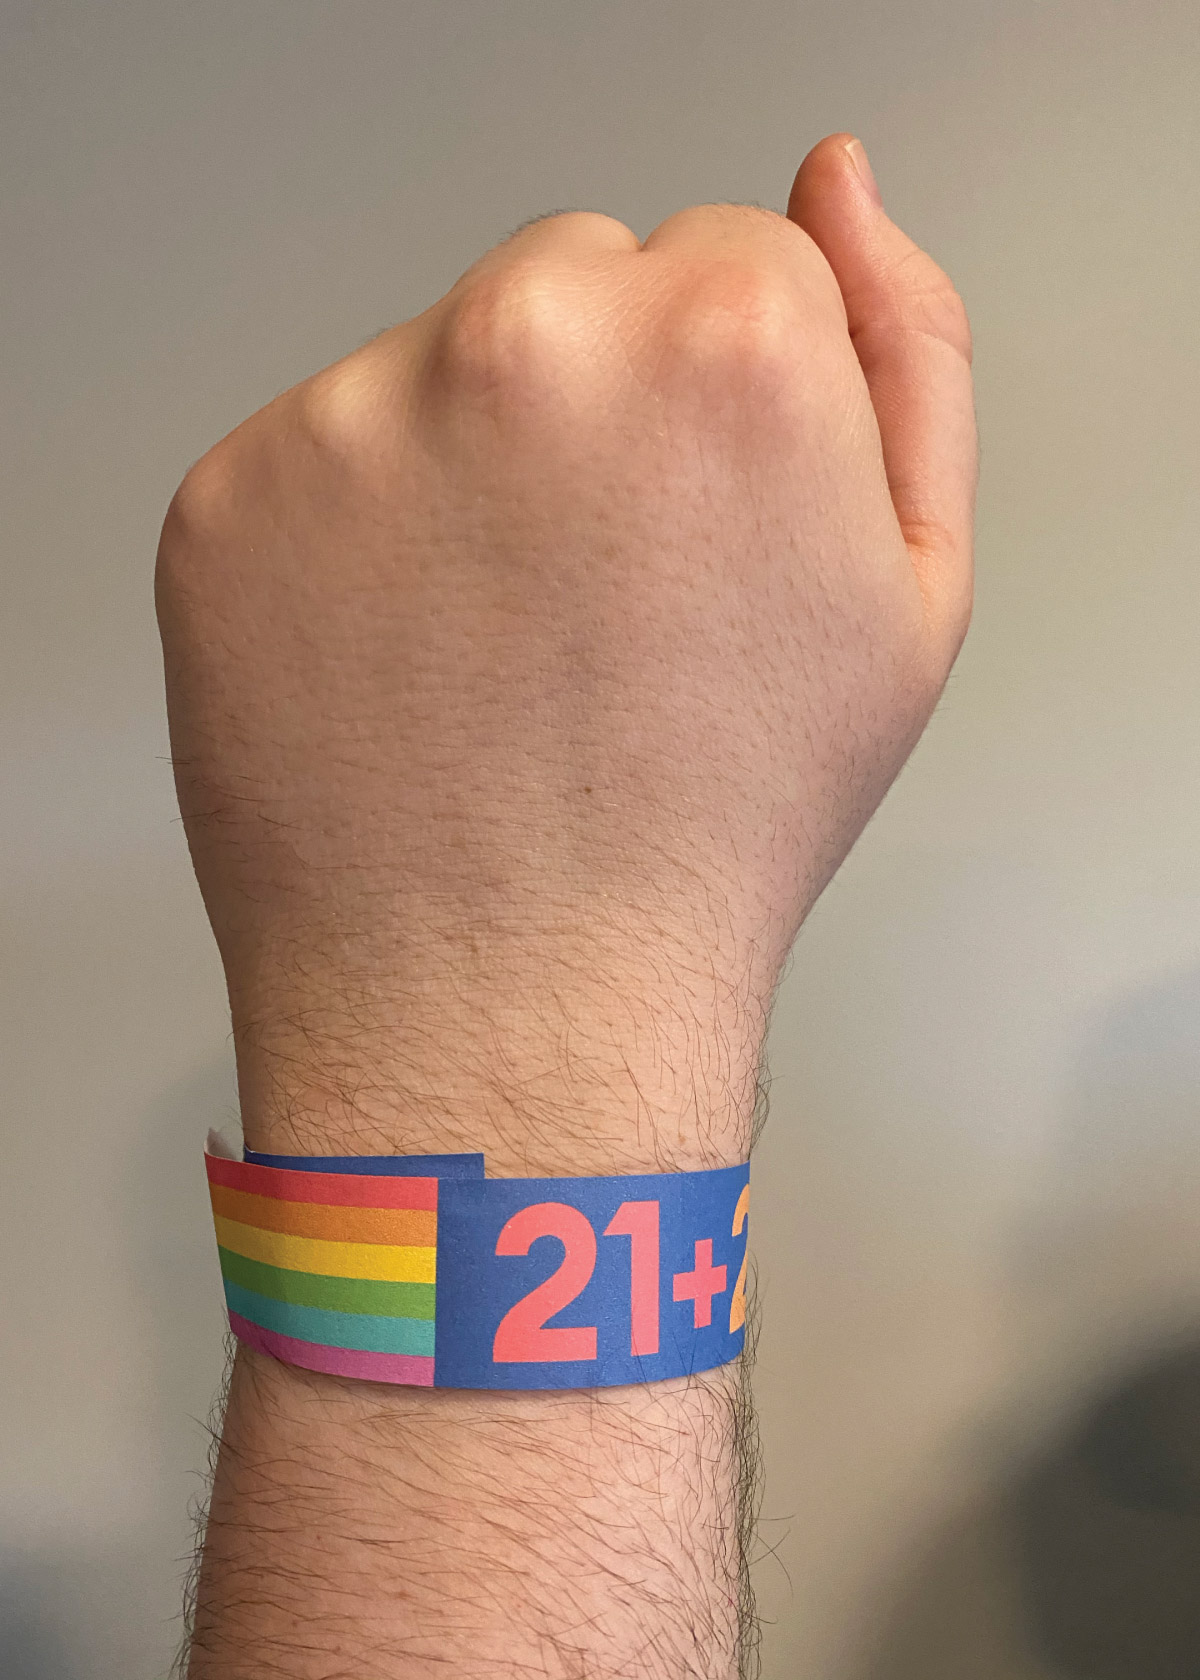 A photo showing what a twenty-one plus barhopping wristband might look like. I printed and wrapped this around a real wrist for this images, and the wrist is pointing upward in a 'resistance' pose. The wristband is navy blue, with the numbers twenty-one and a plus sign repeating across the band in various rainbow colors. The section over the taped part of the band is decorated as a pride flag.